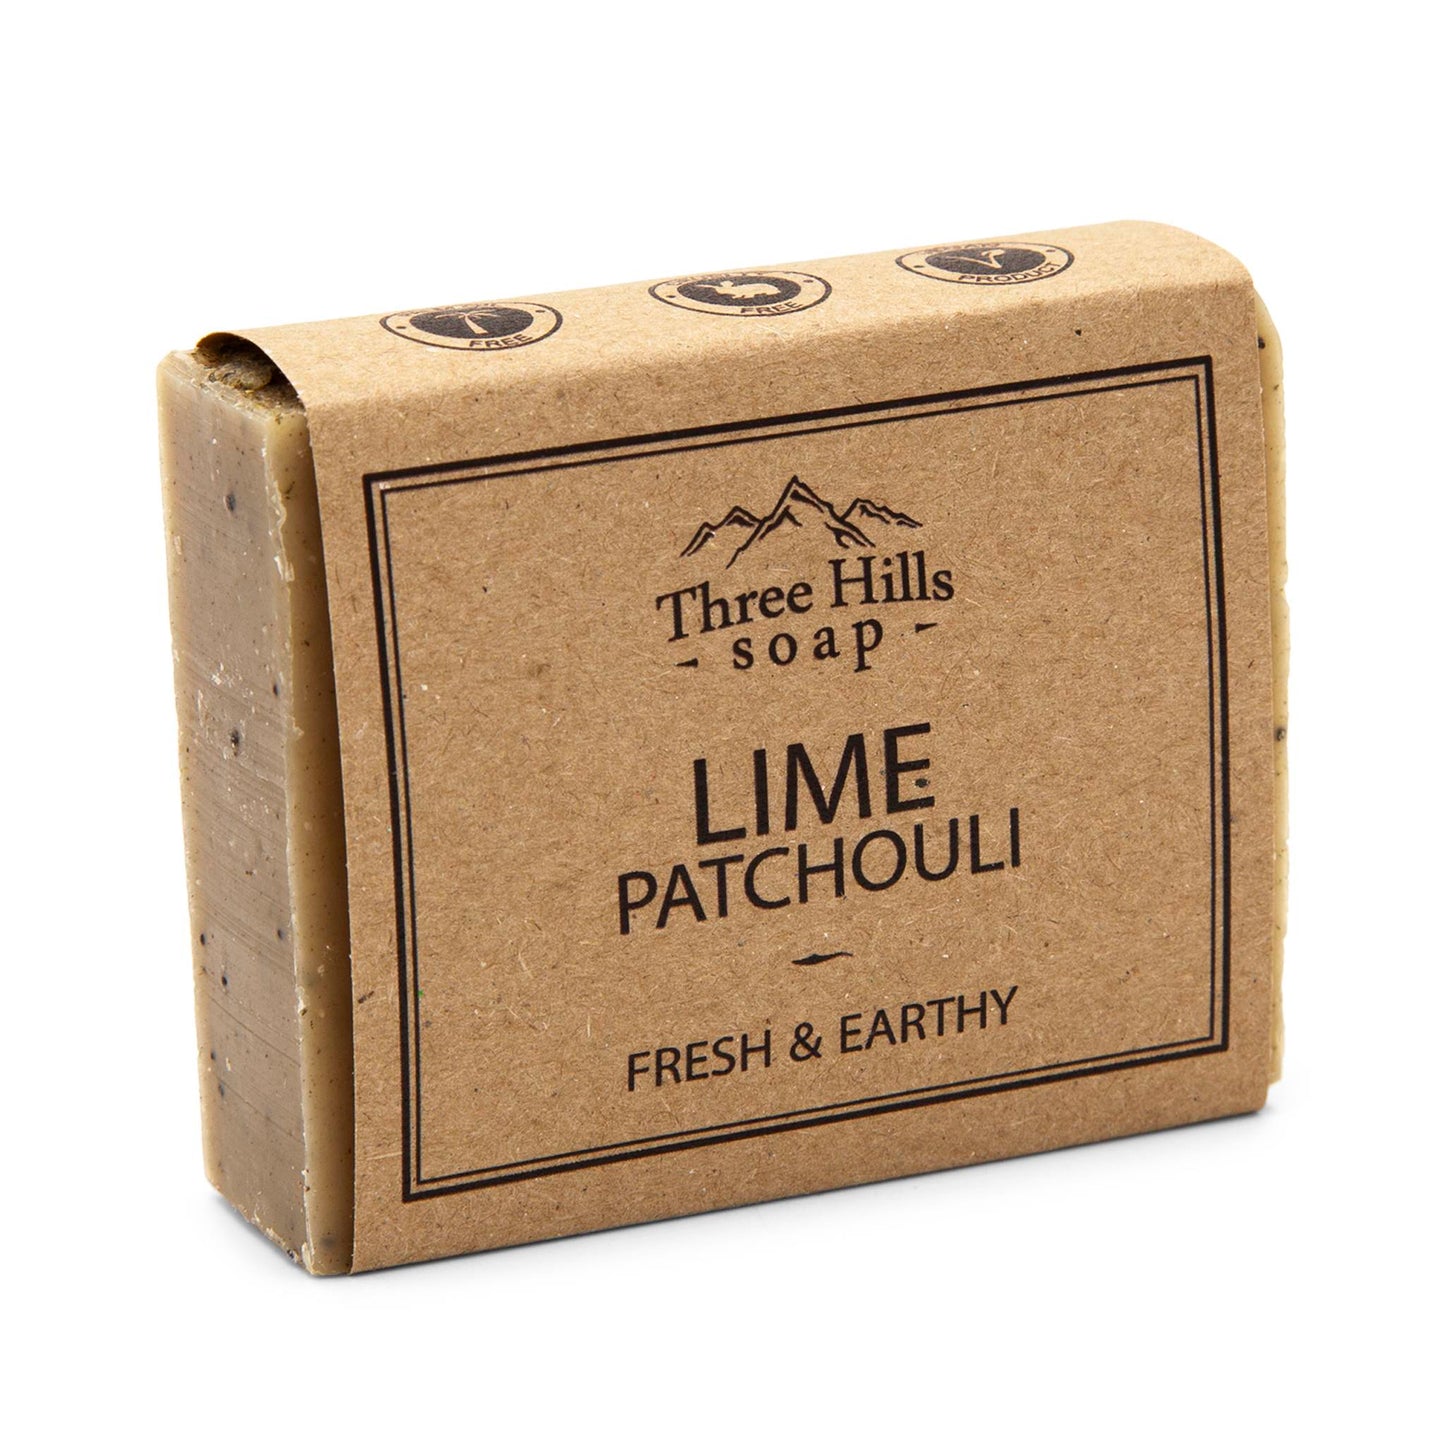 Three Hill Soaps Soap Lime Patchouli Soap - Three Hills Soaps